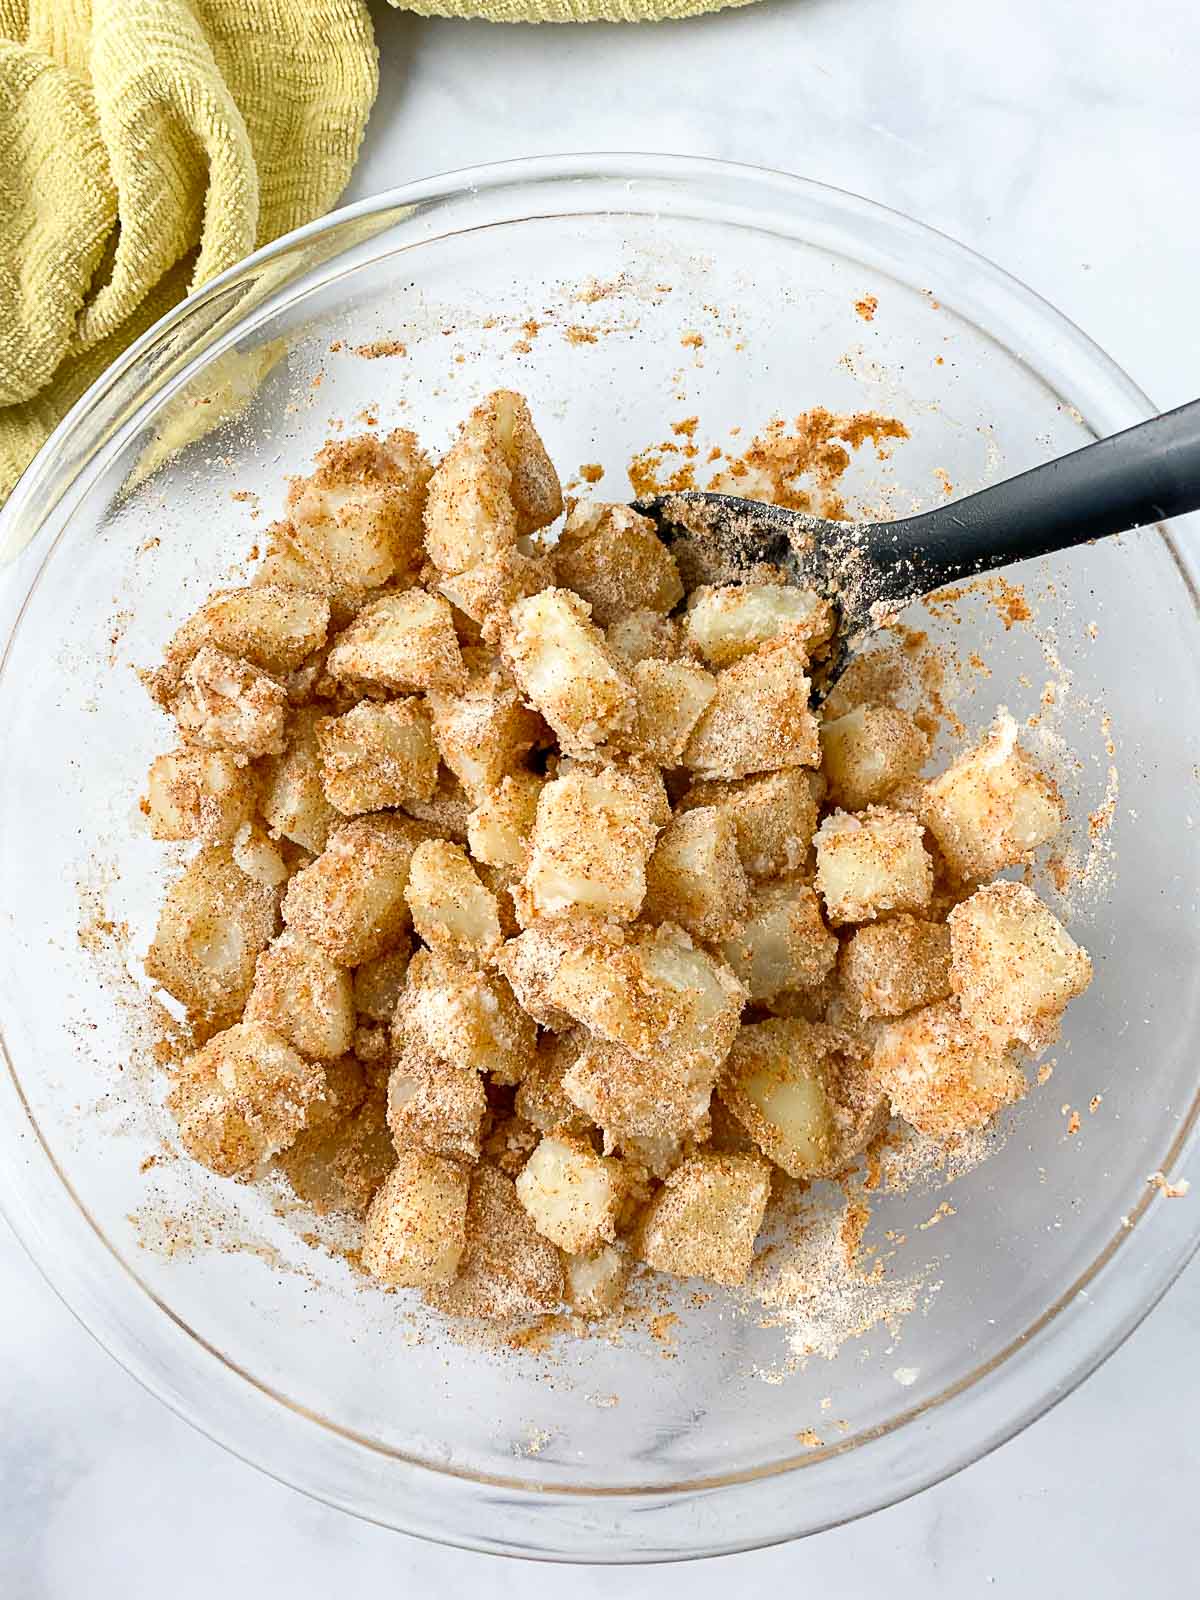 Diced potatoes coated with seasoning in a glass bowl.